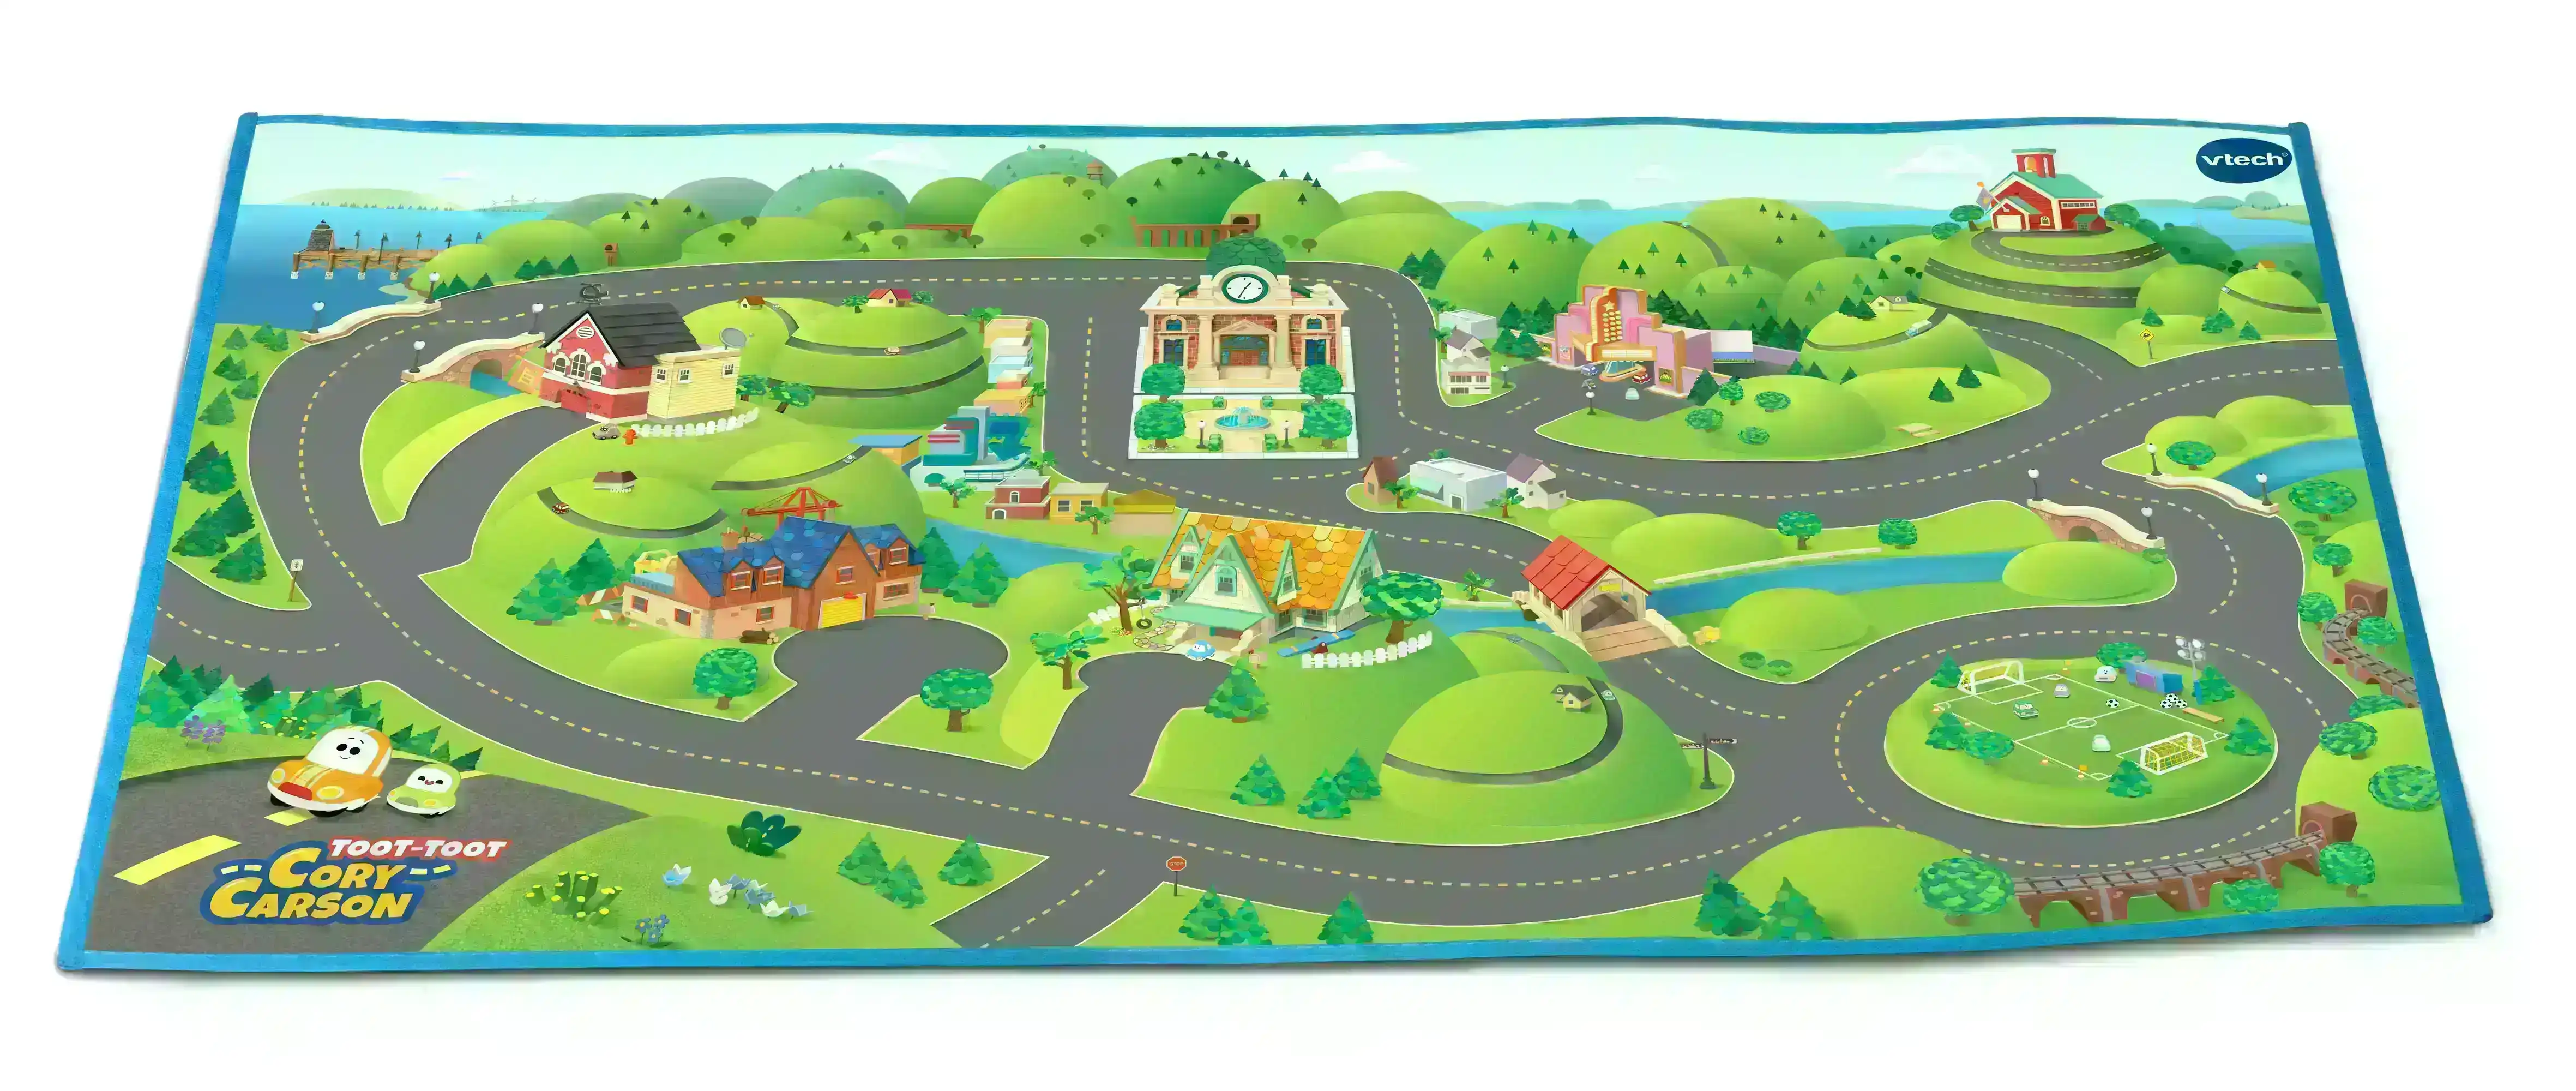 Toot-Toot Cory Carson Playmat